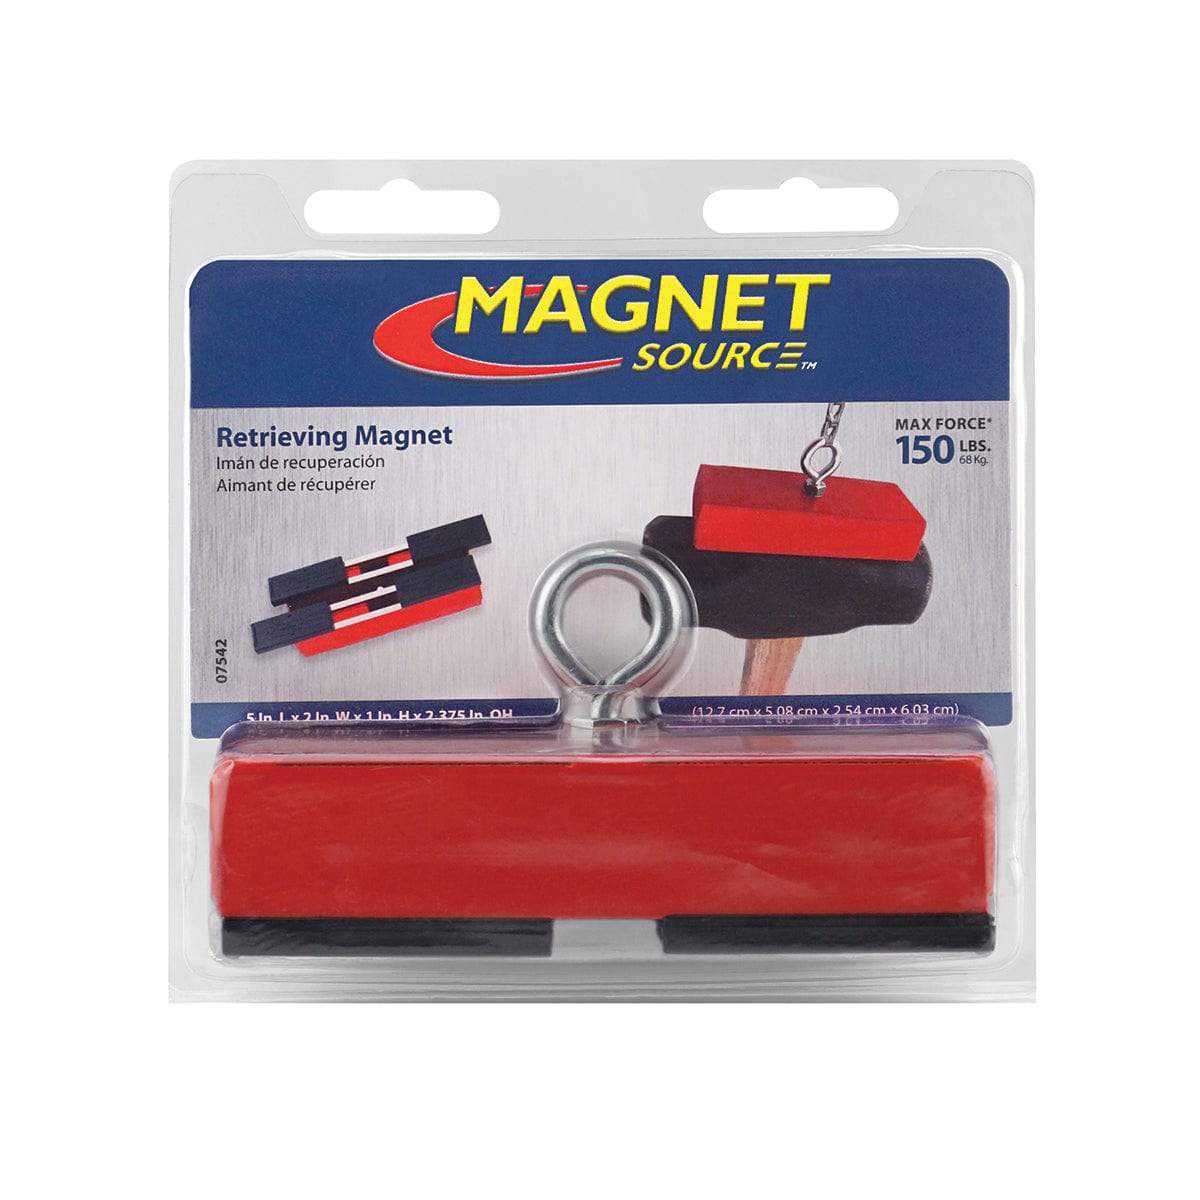 Magnet Source Heavy-Duty Holding and Retrieving Magnet